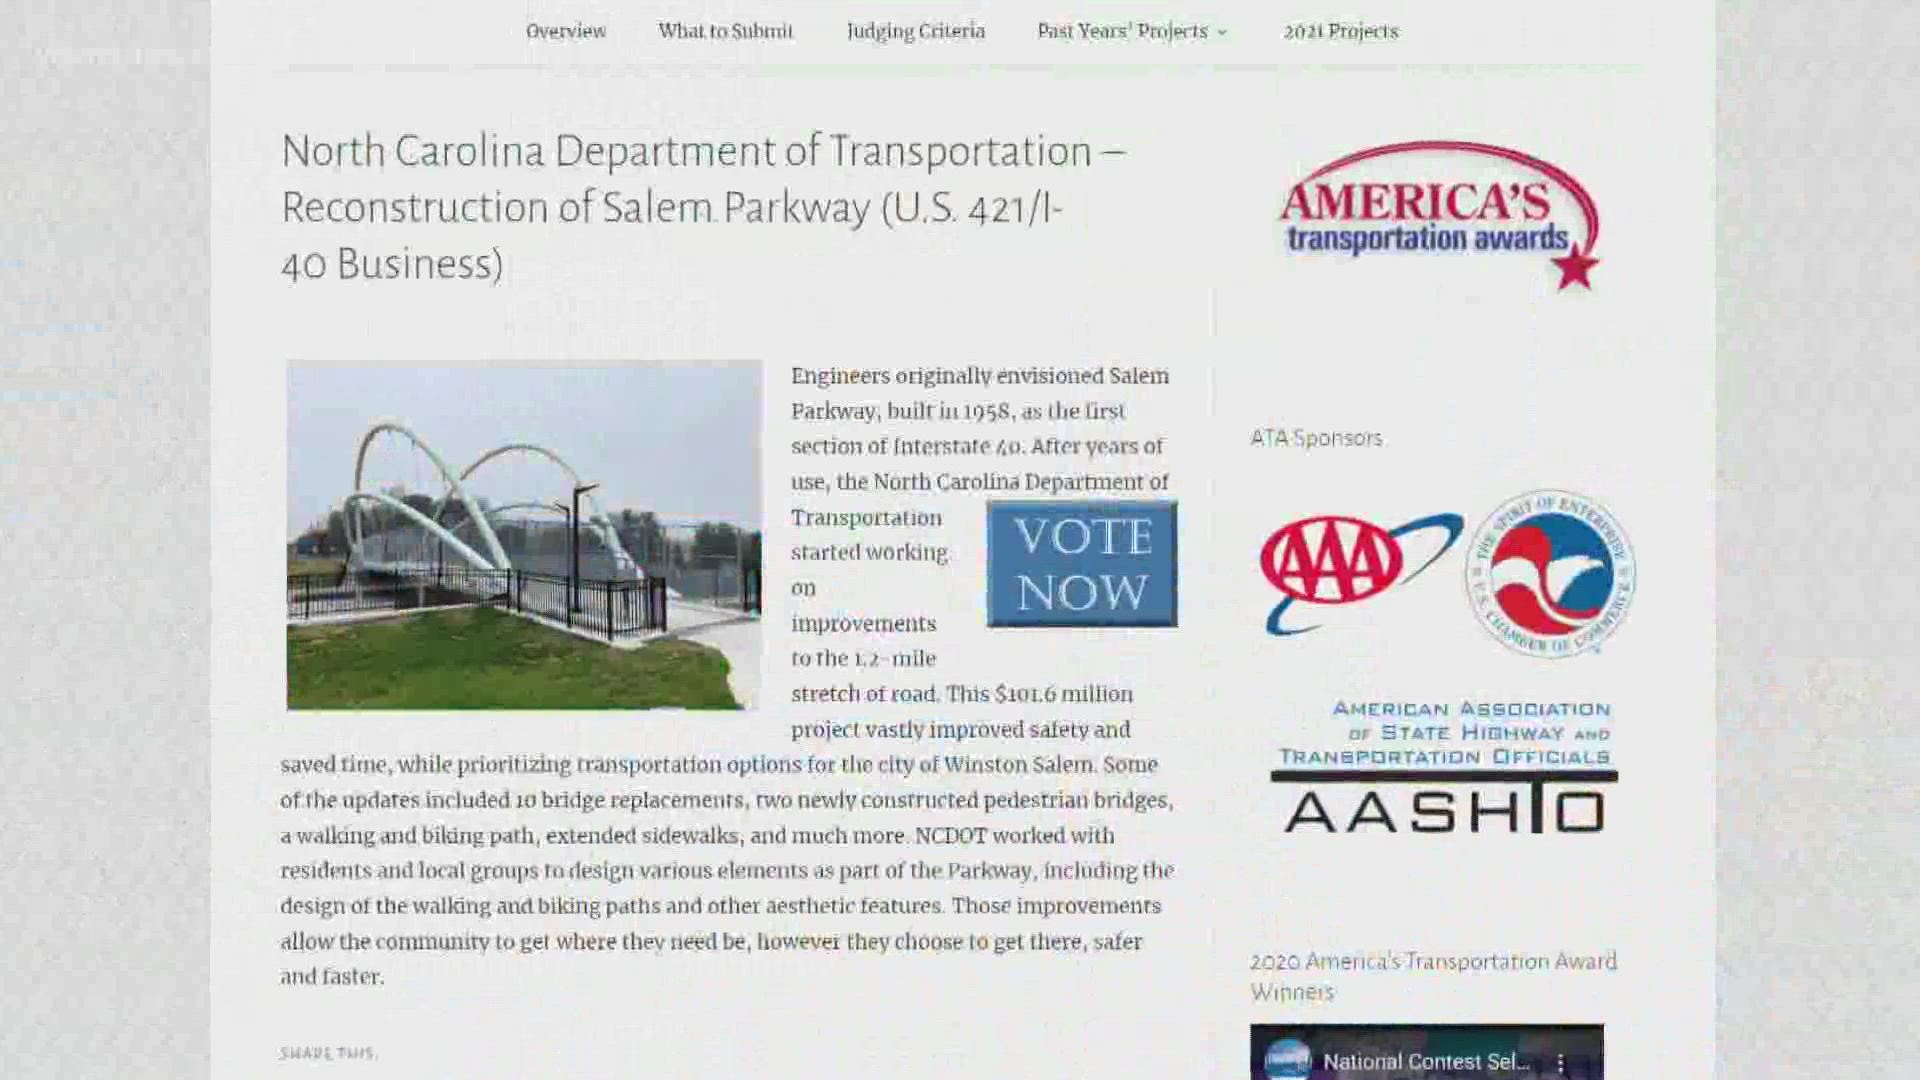 The city of Winston-Salem won an award from the National Transportation Bureau for its work on the Salem Parkway.